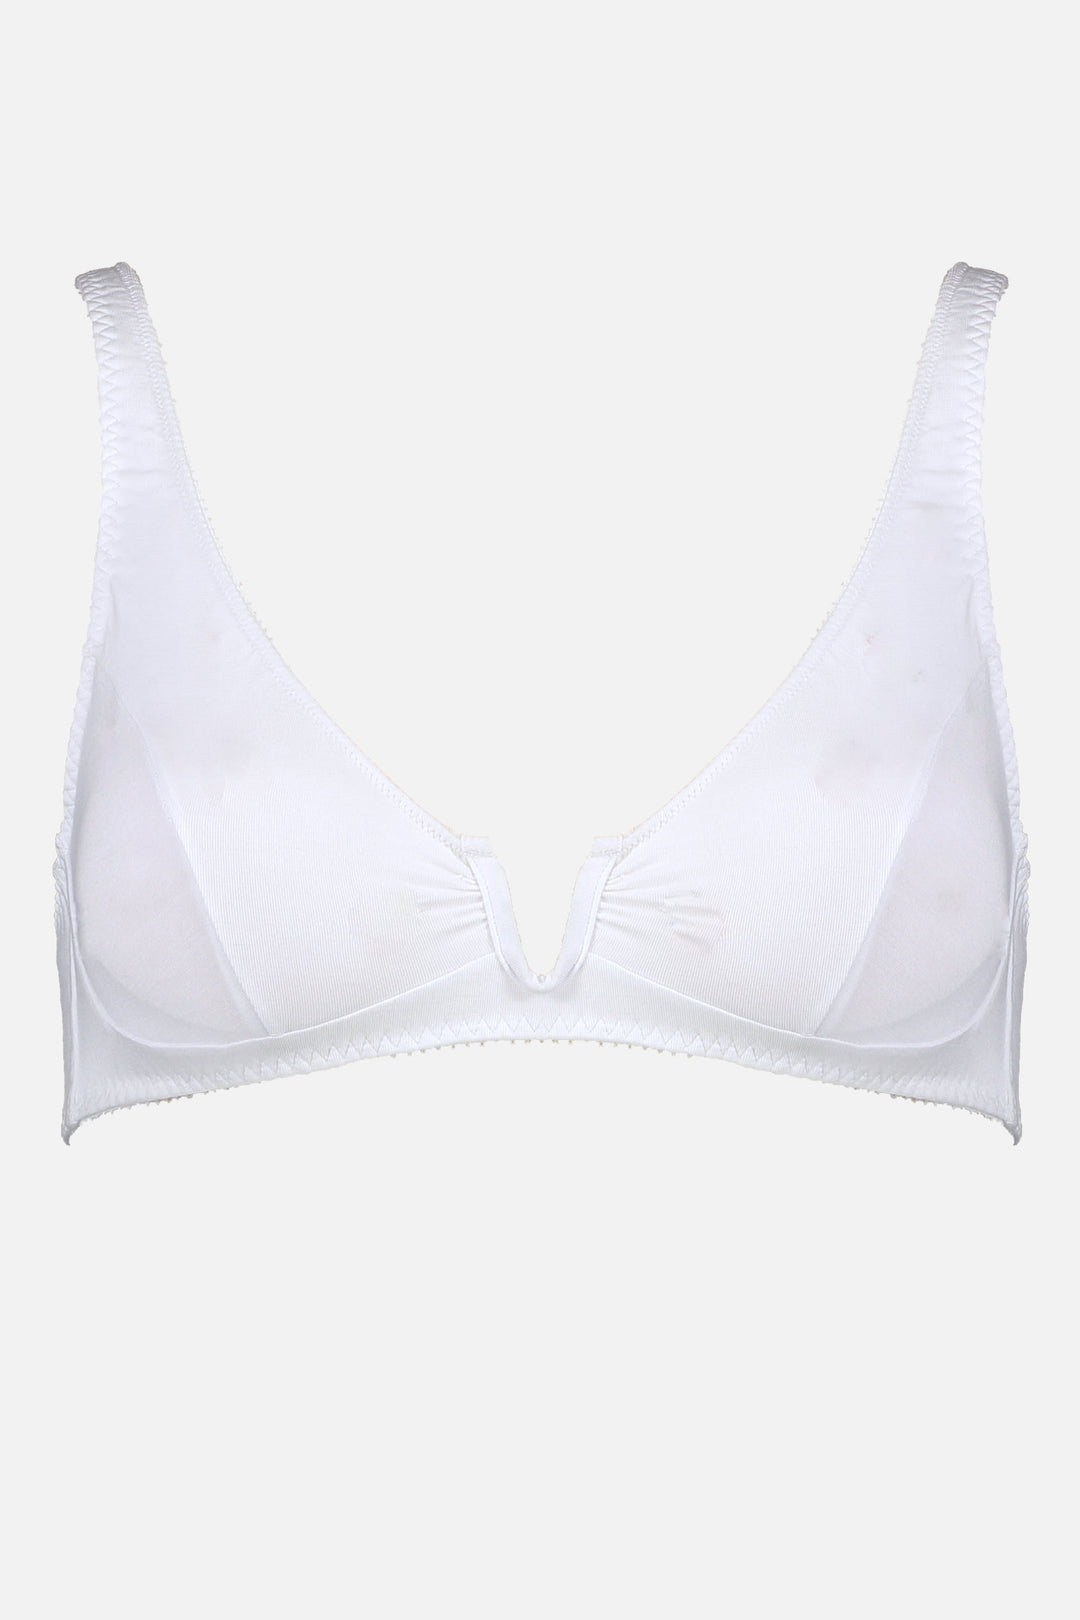 Videris Lingerie Sarah underwire free soft cup bra in white TENCEL™ with a scooped plunge cup and front U wire